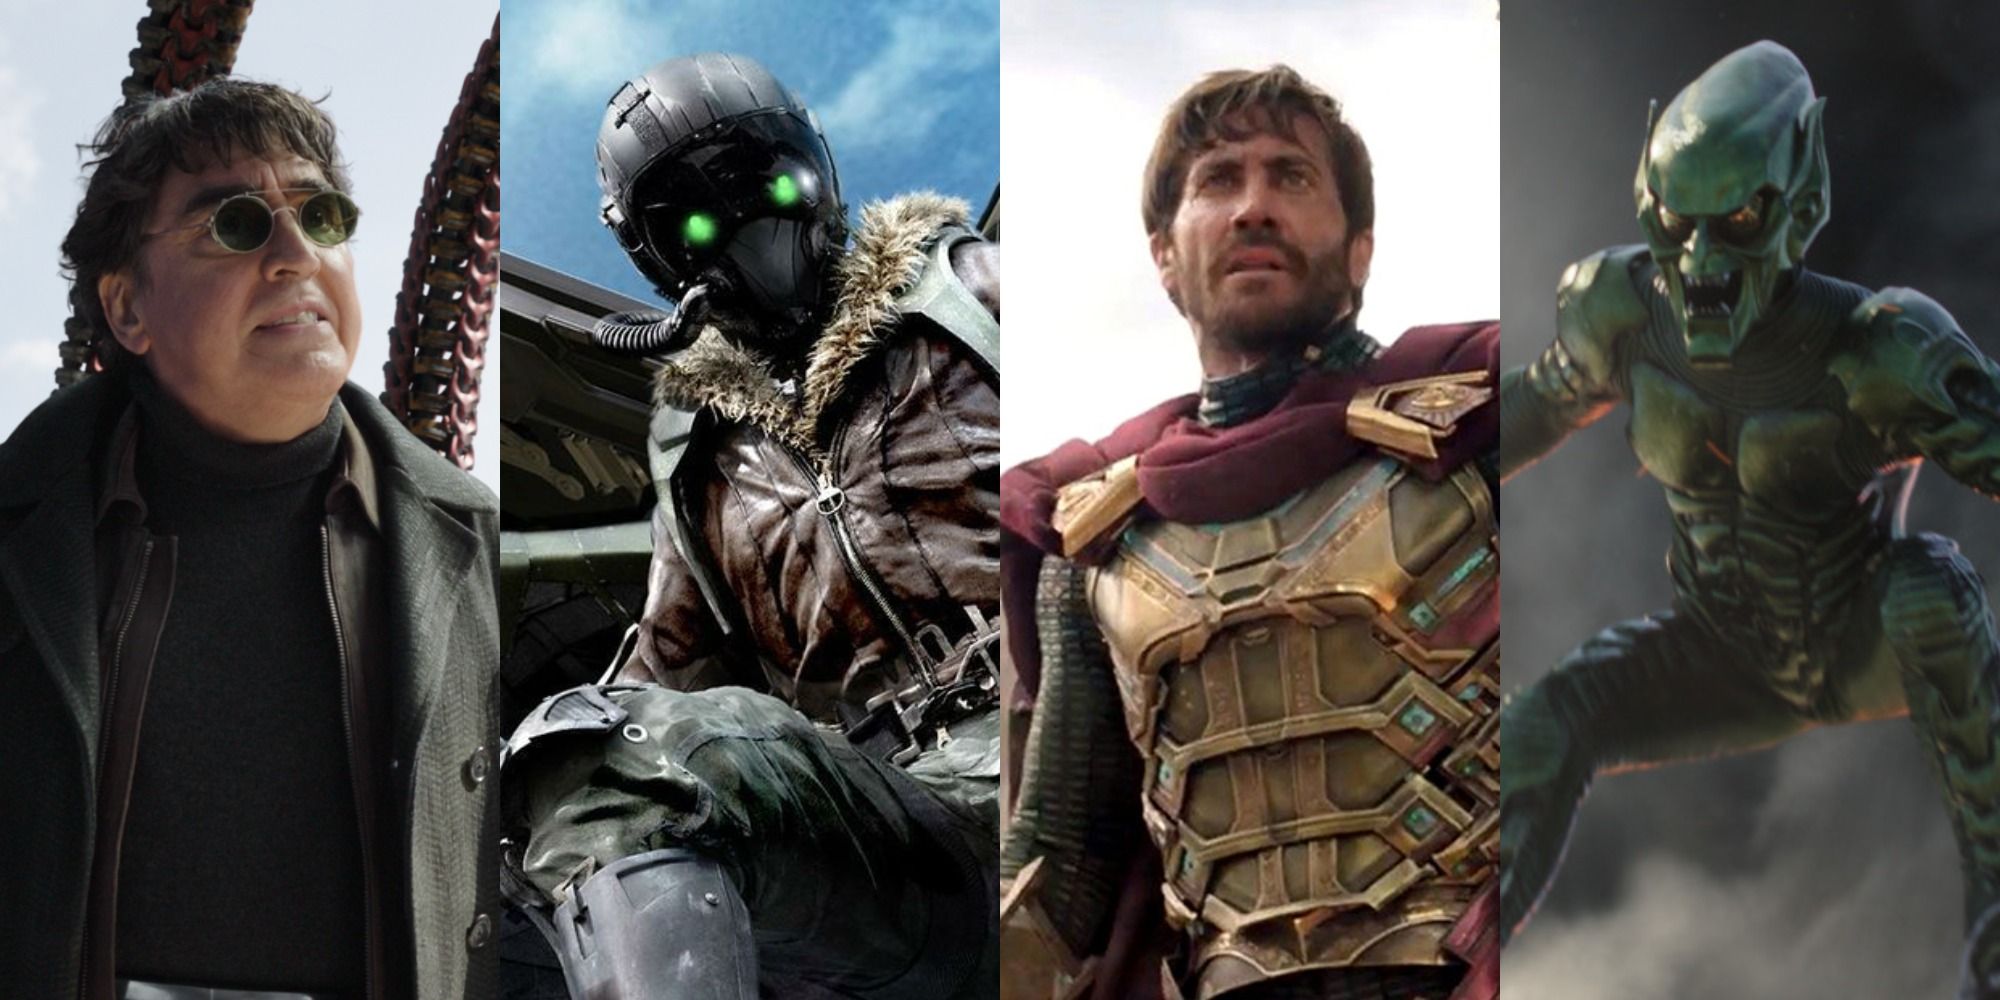 Split image of Doctor Octopus, Vulture, Mysterio and Green Goblin in the Spider-Man movies